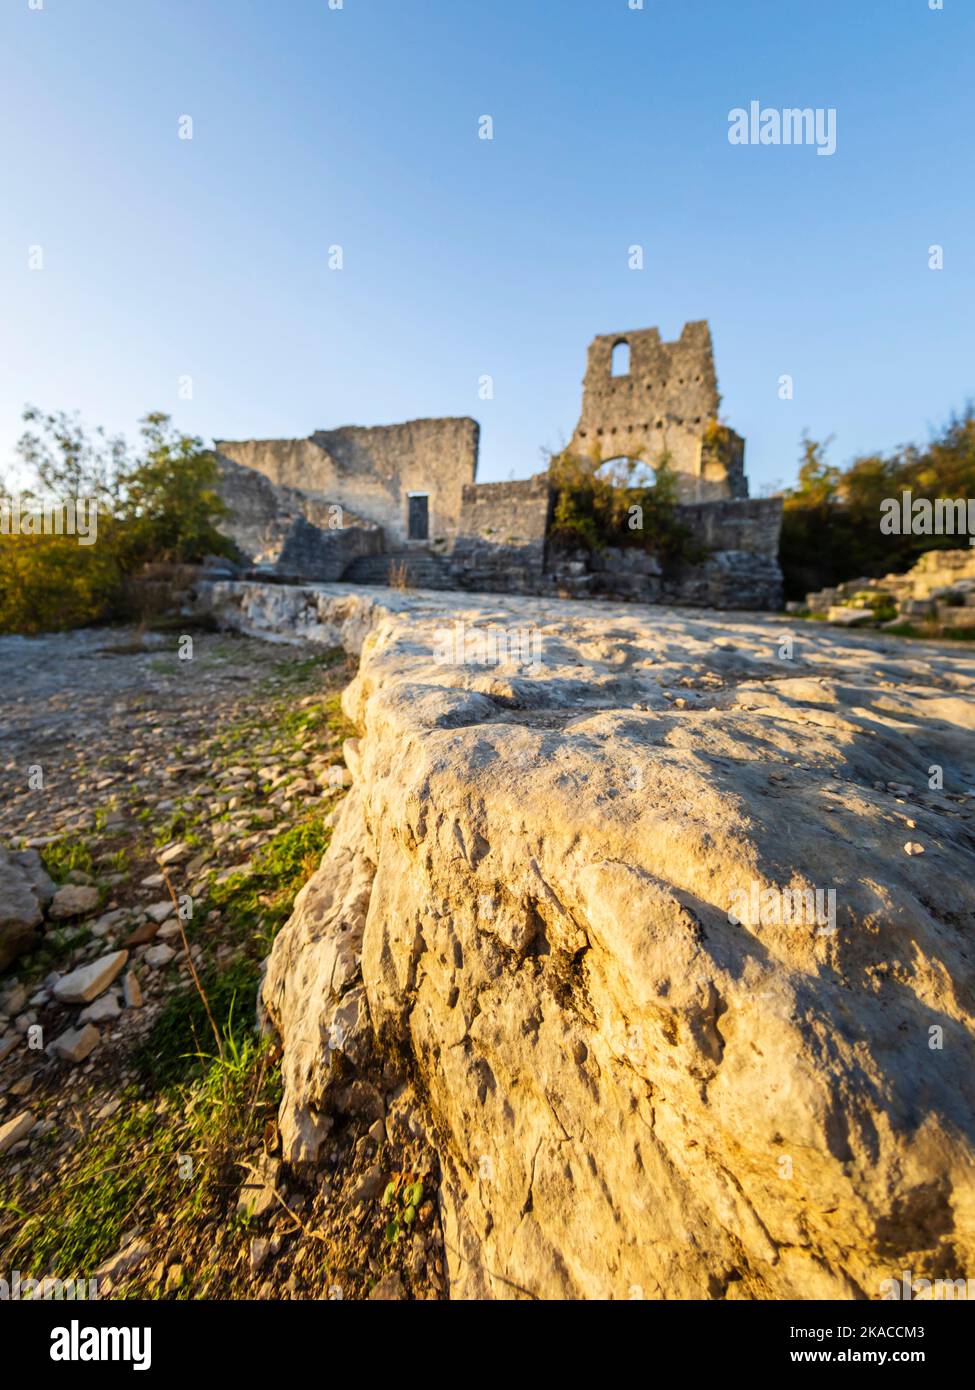 Remains of abandoned derelict old town Dvigrad in Istria Croatia Europe, close up detail closeup blurry background Stock Photo